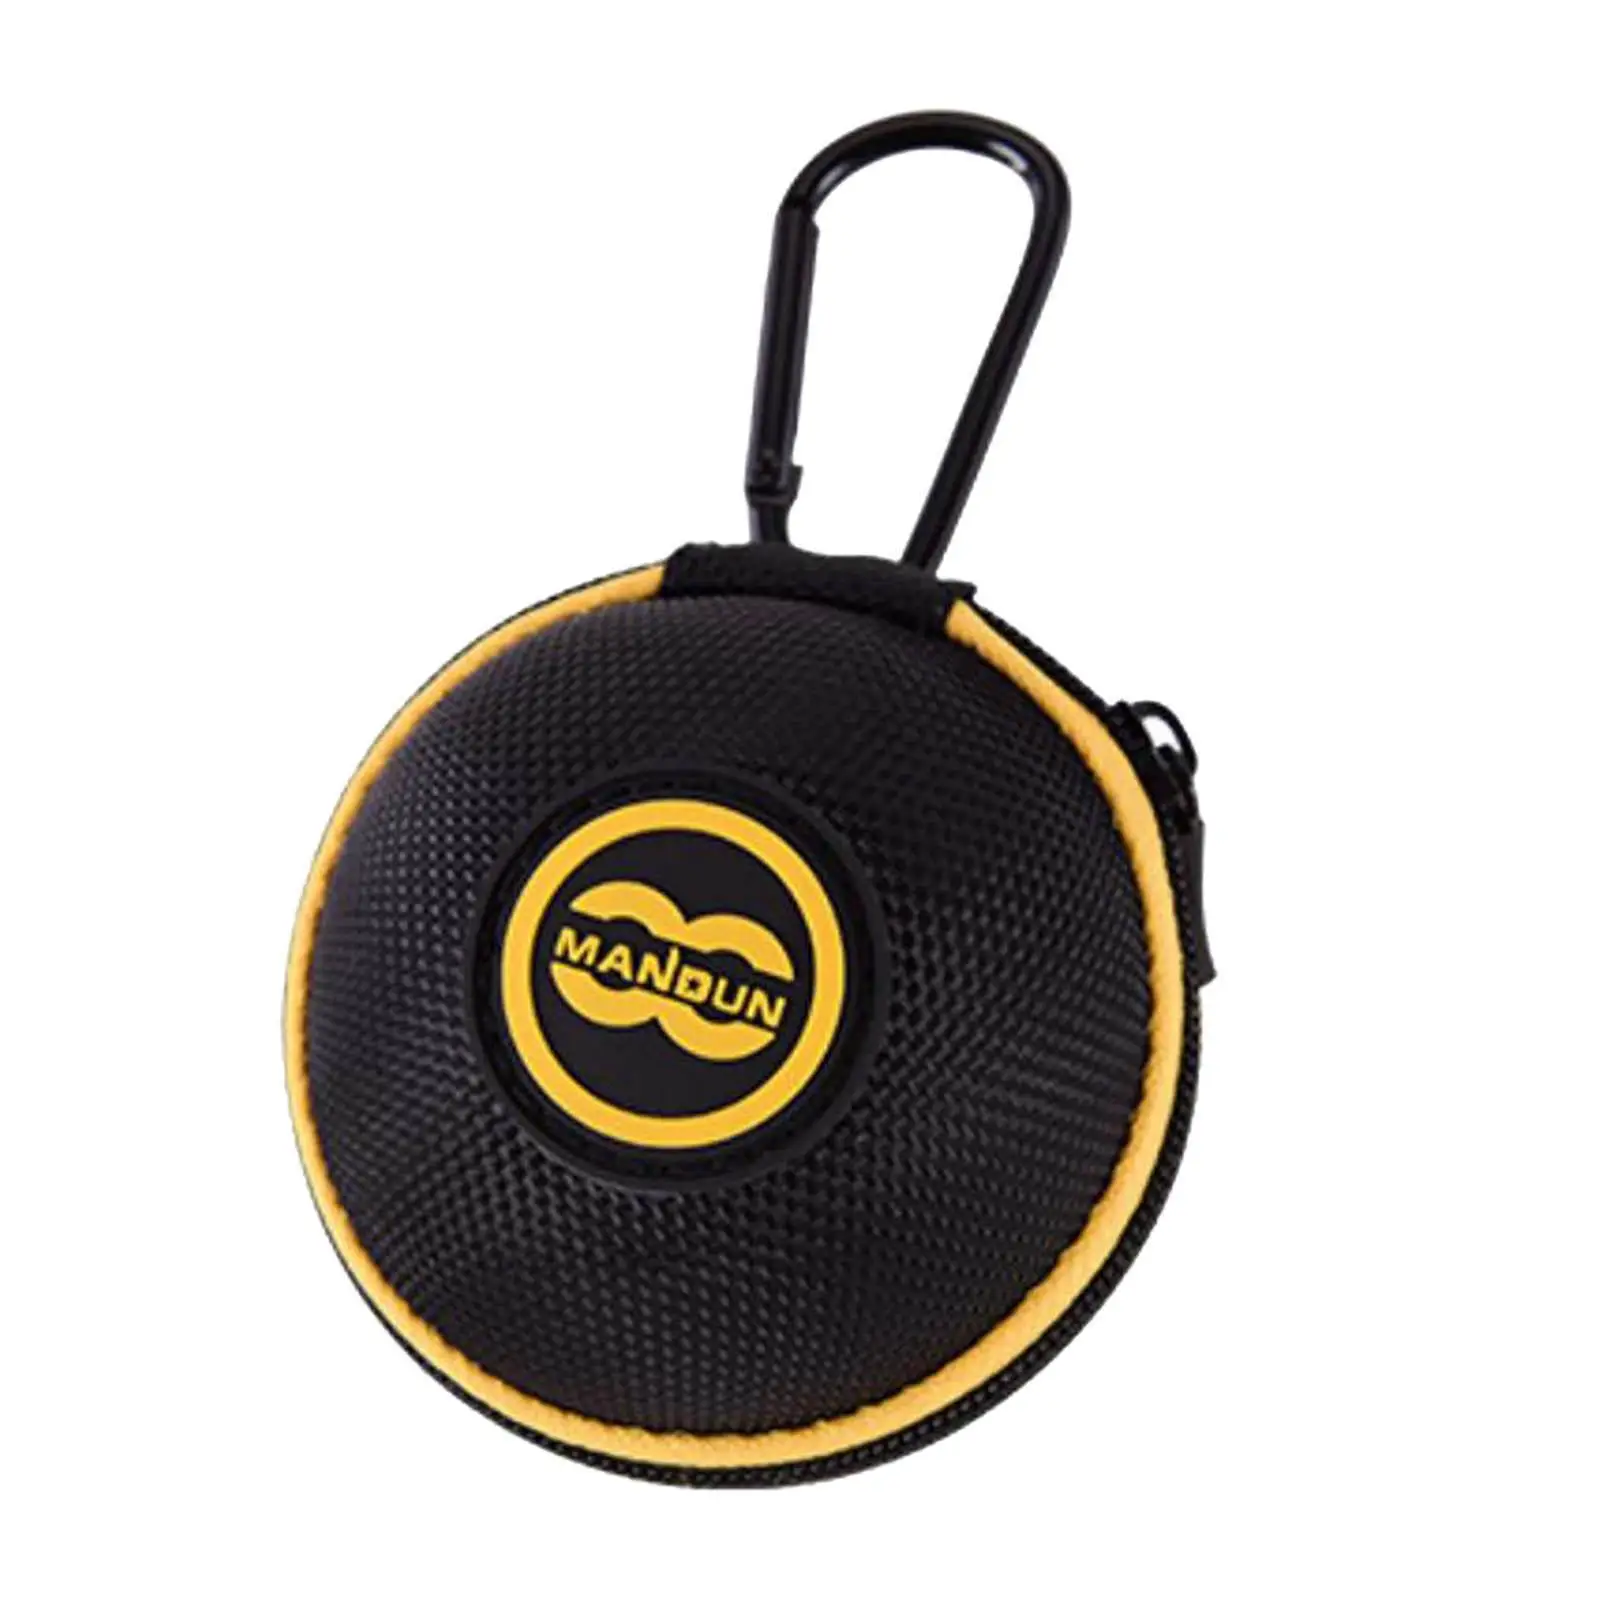 Portable Cue Ball Carrying Case Billiard Balls Storage Bag Clip On Attaching